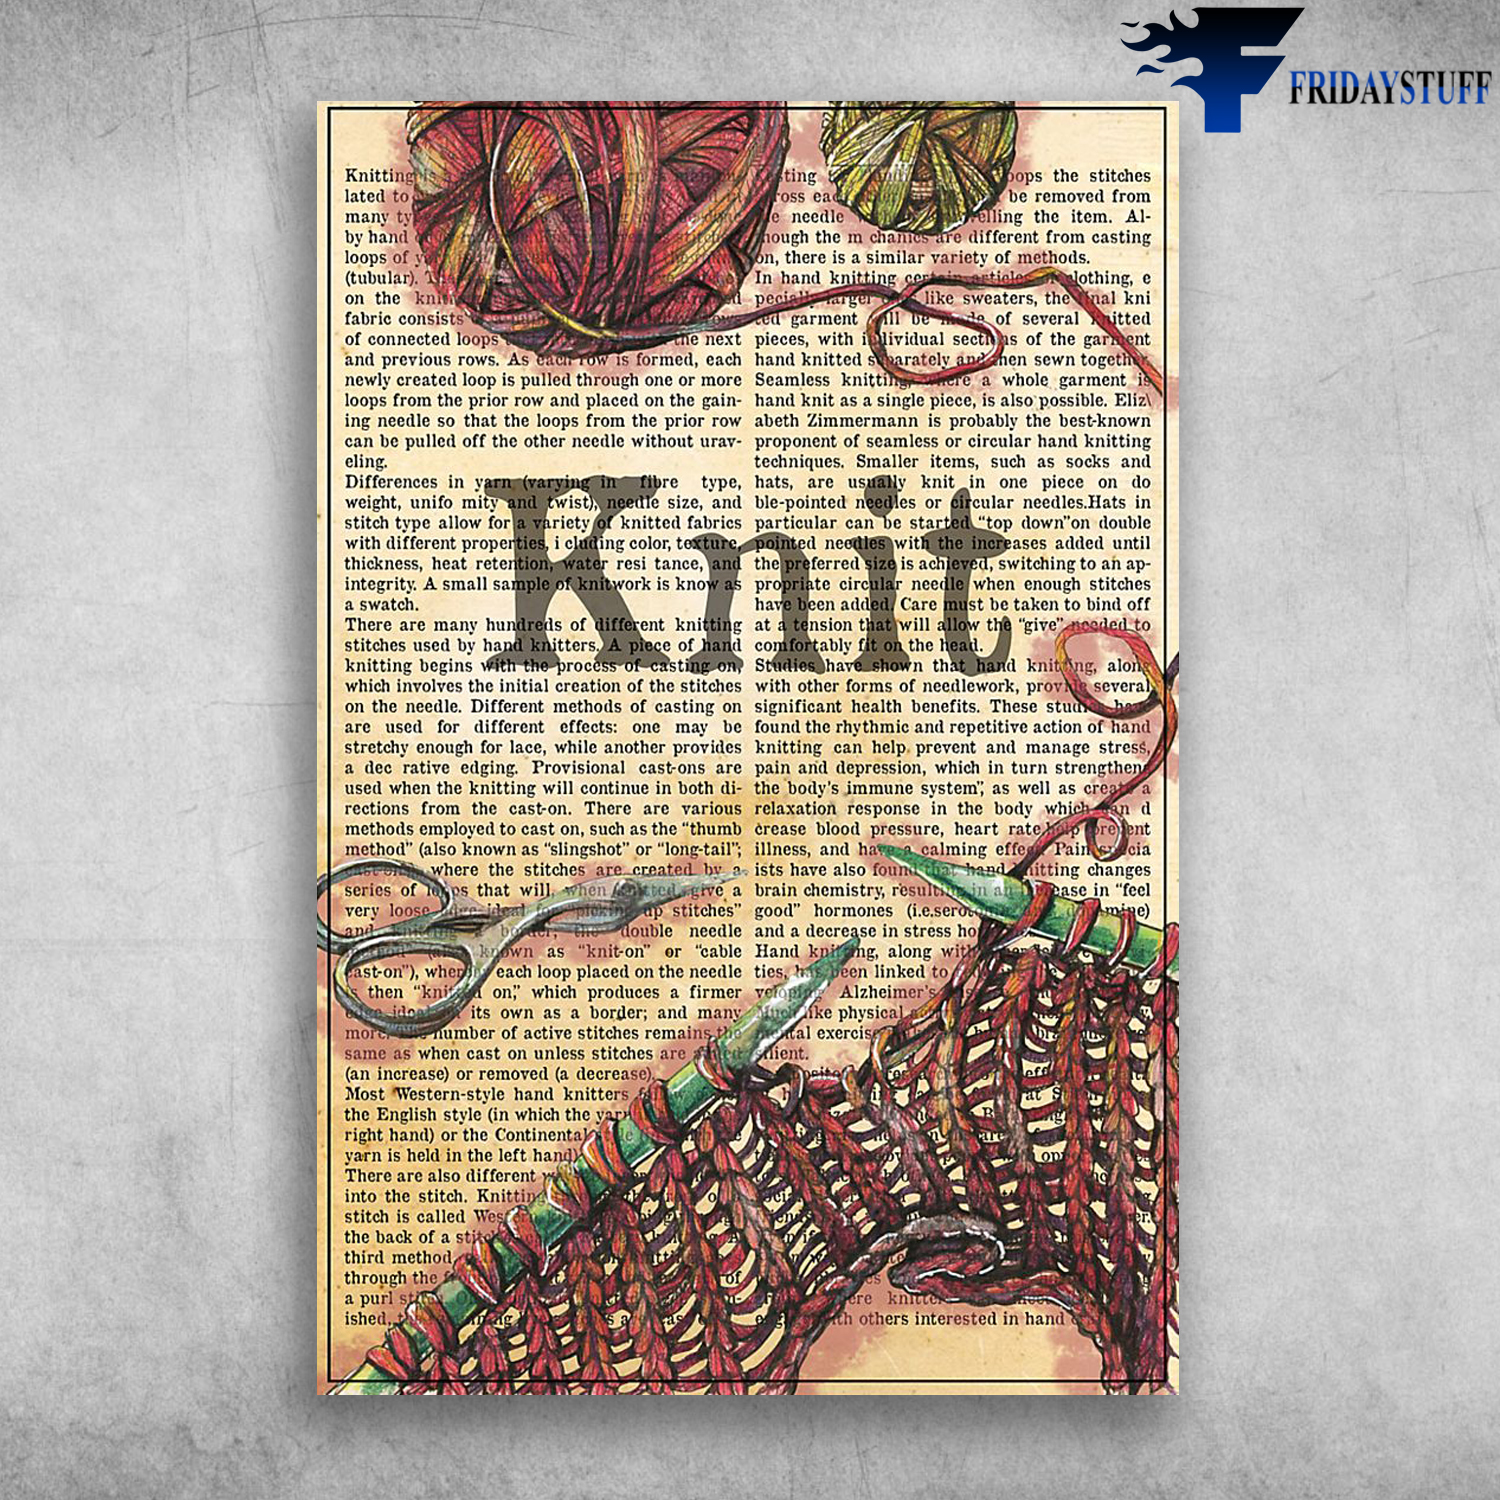 There Are Many Hundreds Of Different Knitting Stitches